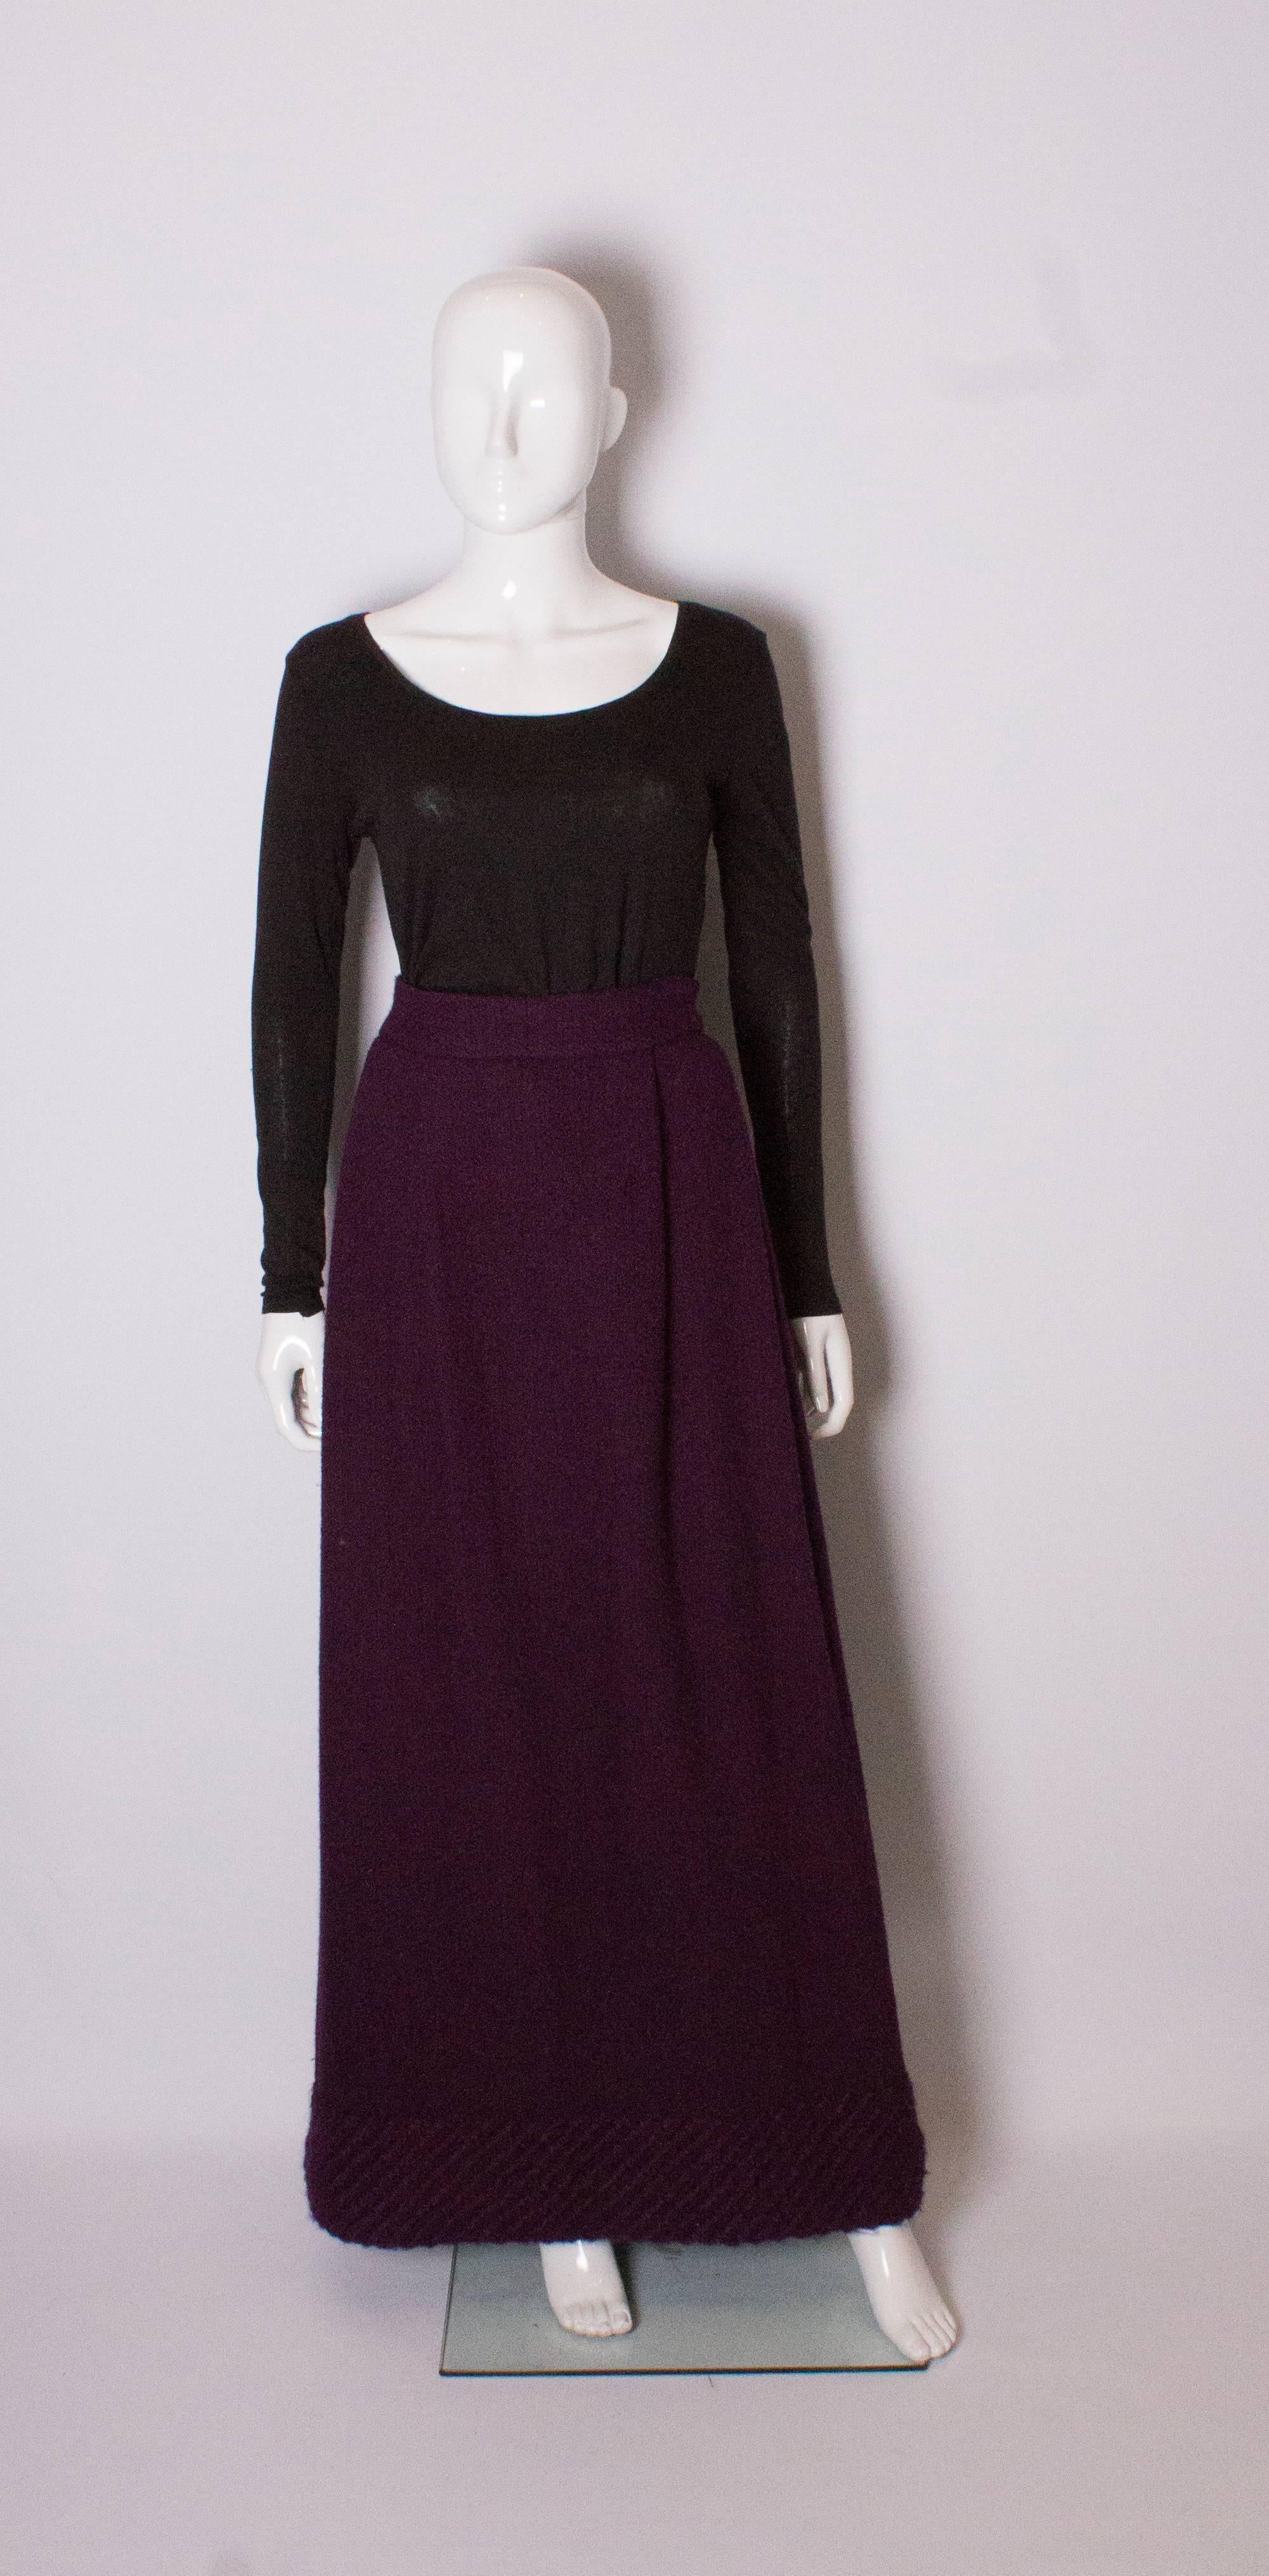 Great for chilly weather, this purple wool skirt by Scottish firm Inverhouse is fully lined, has a central back zip and a 5' 'woven hem,so hangs beautifuly. It is heavy.